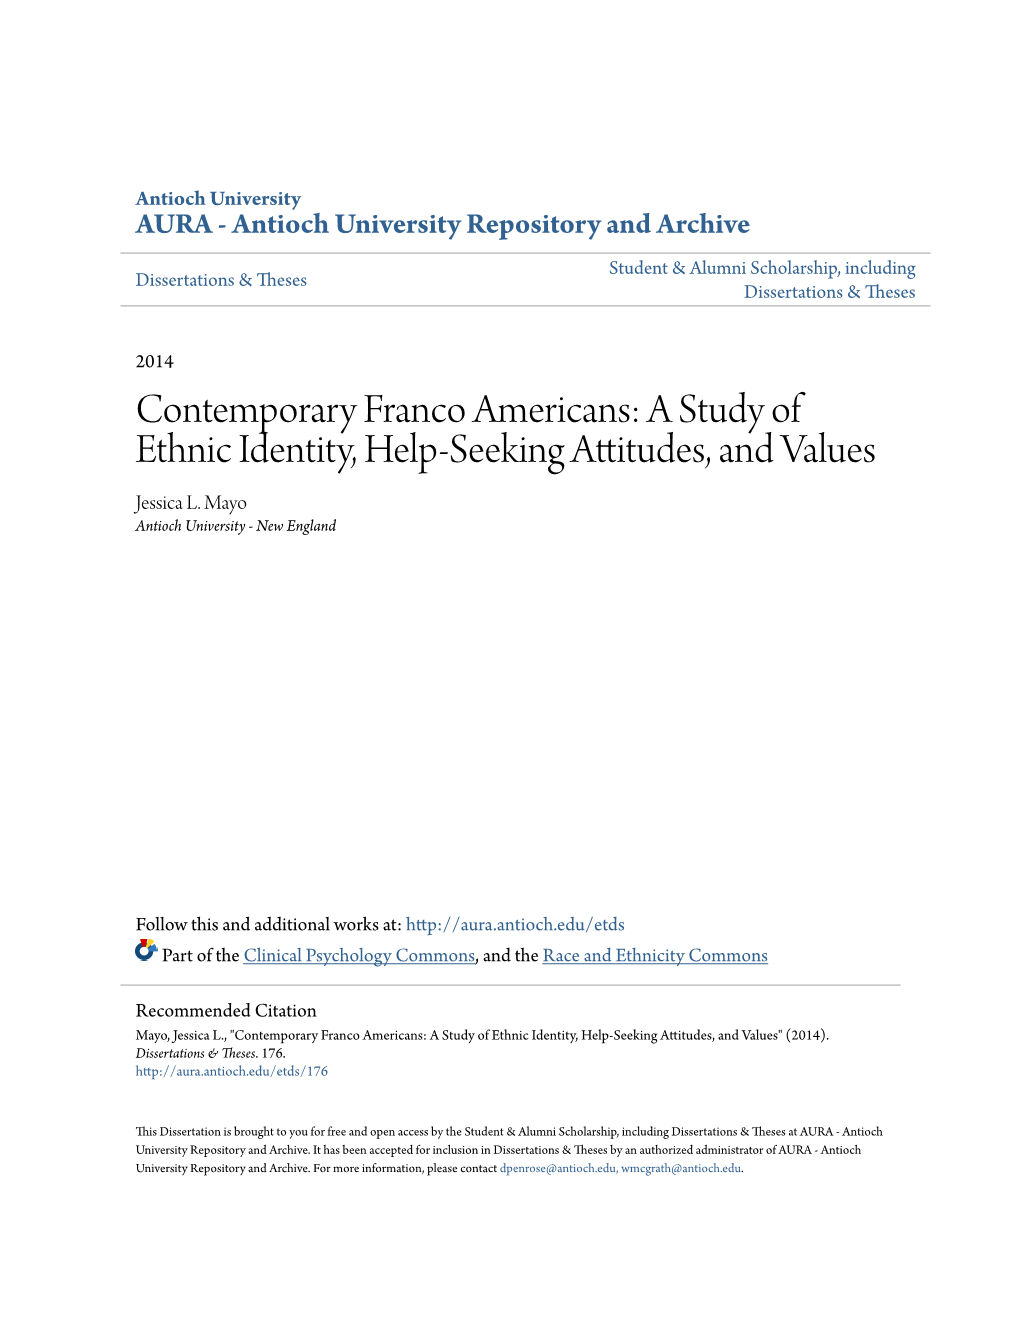 Contemporary Franco Americans: a Study of Ethnic Identity, Help-Seeking Attitudes, and Values Jessica L